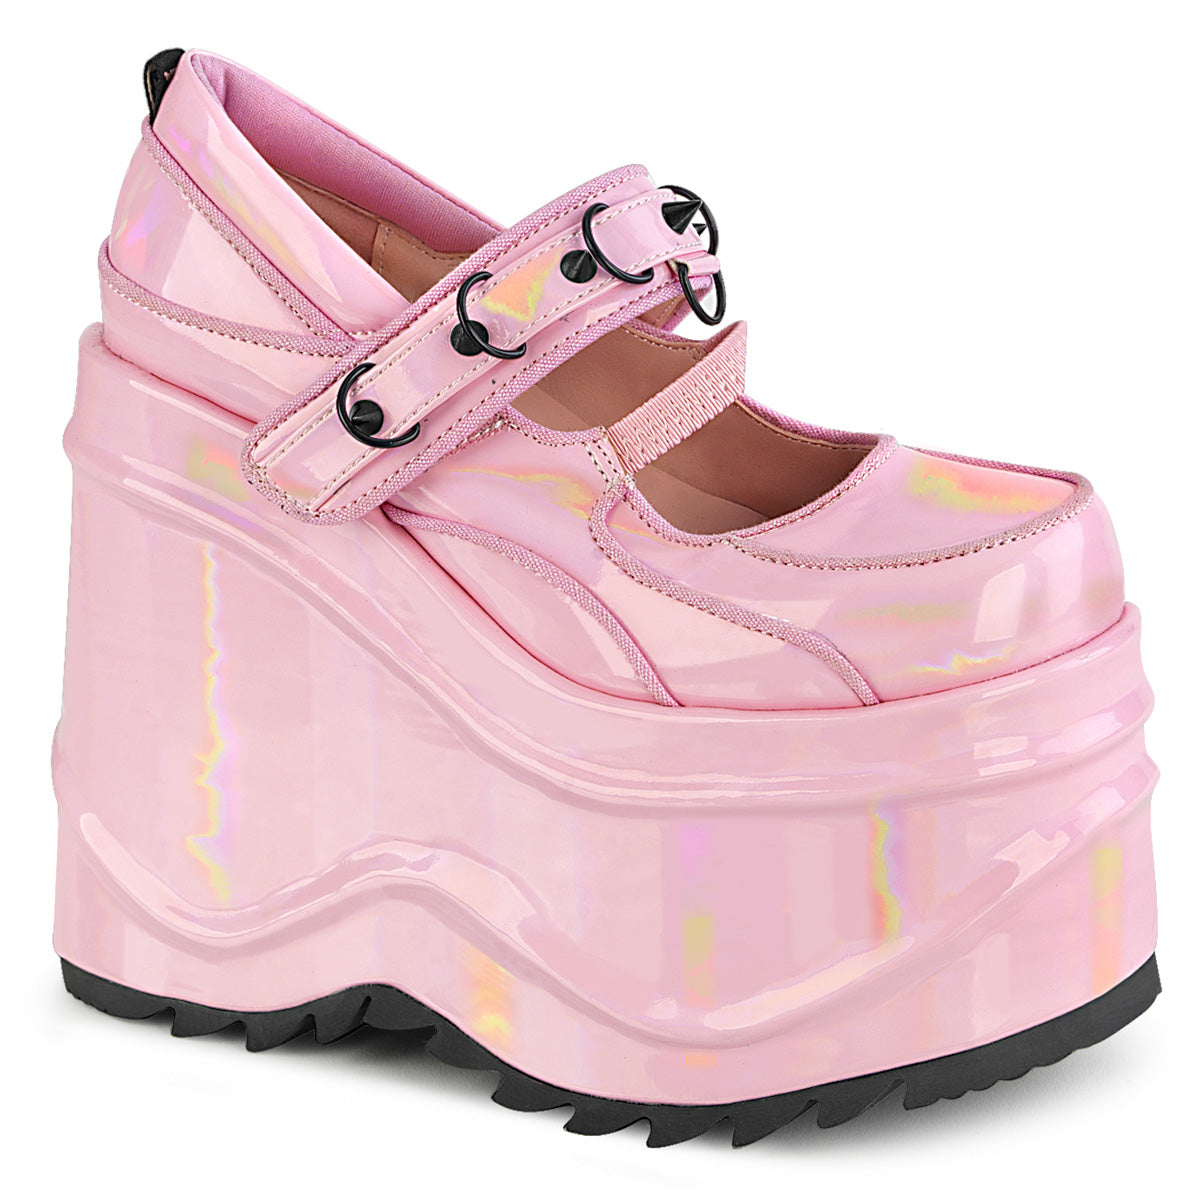 WAVE-48 Baby Pink Hologram Patent